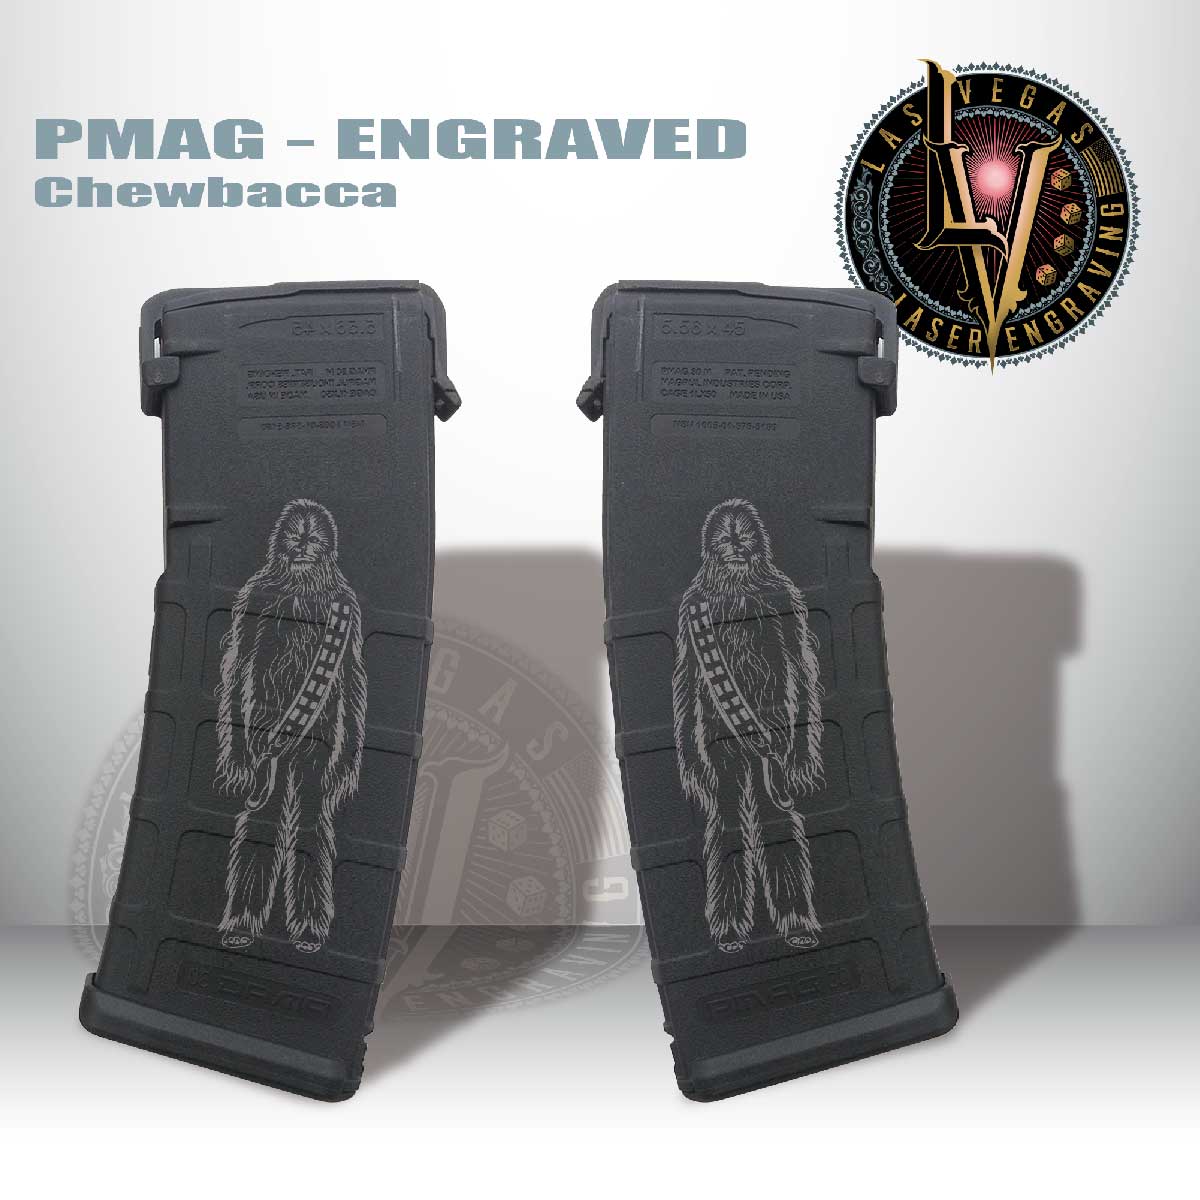 PMAG Chewy